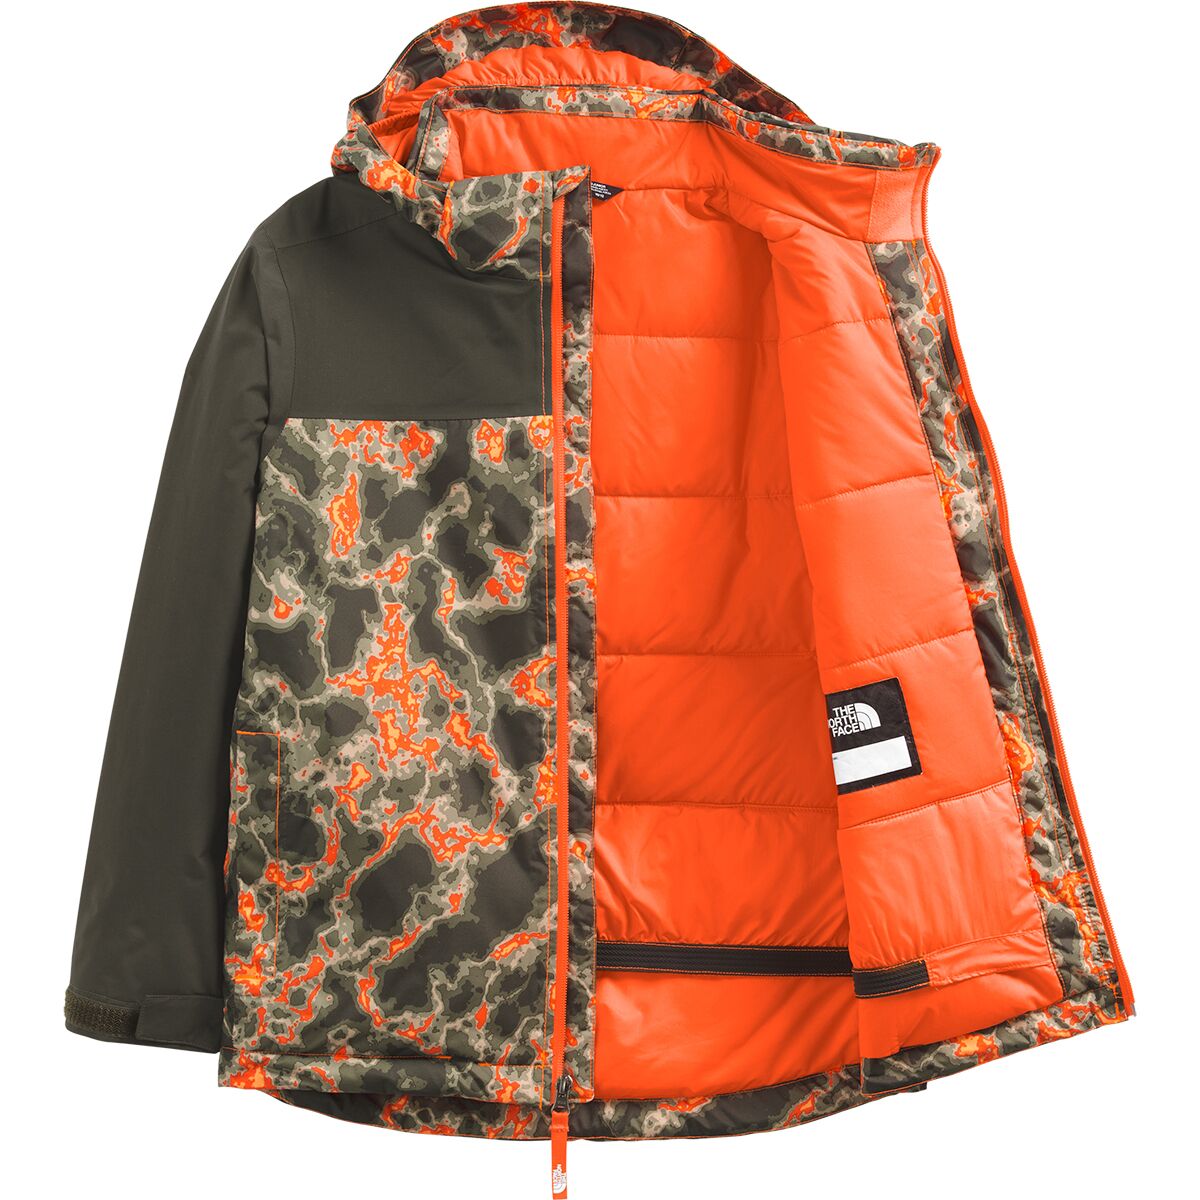 The North Face Snowquest Plus Insulated Jacket - Boys' - Kids